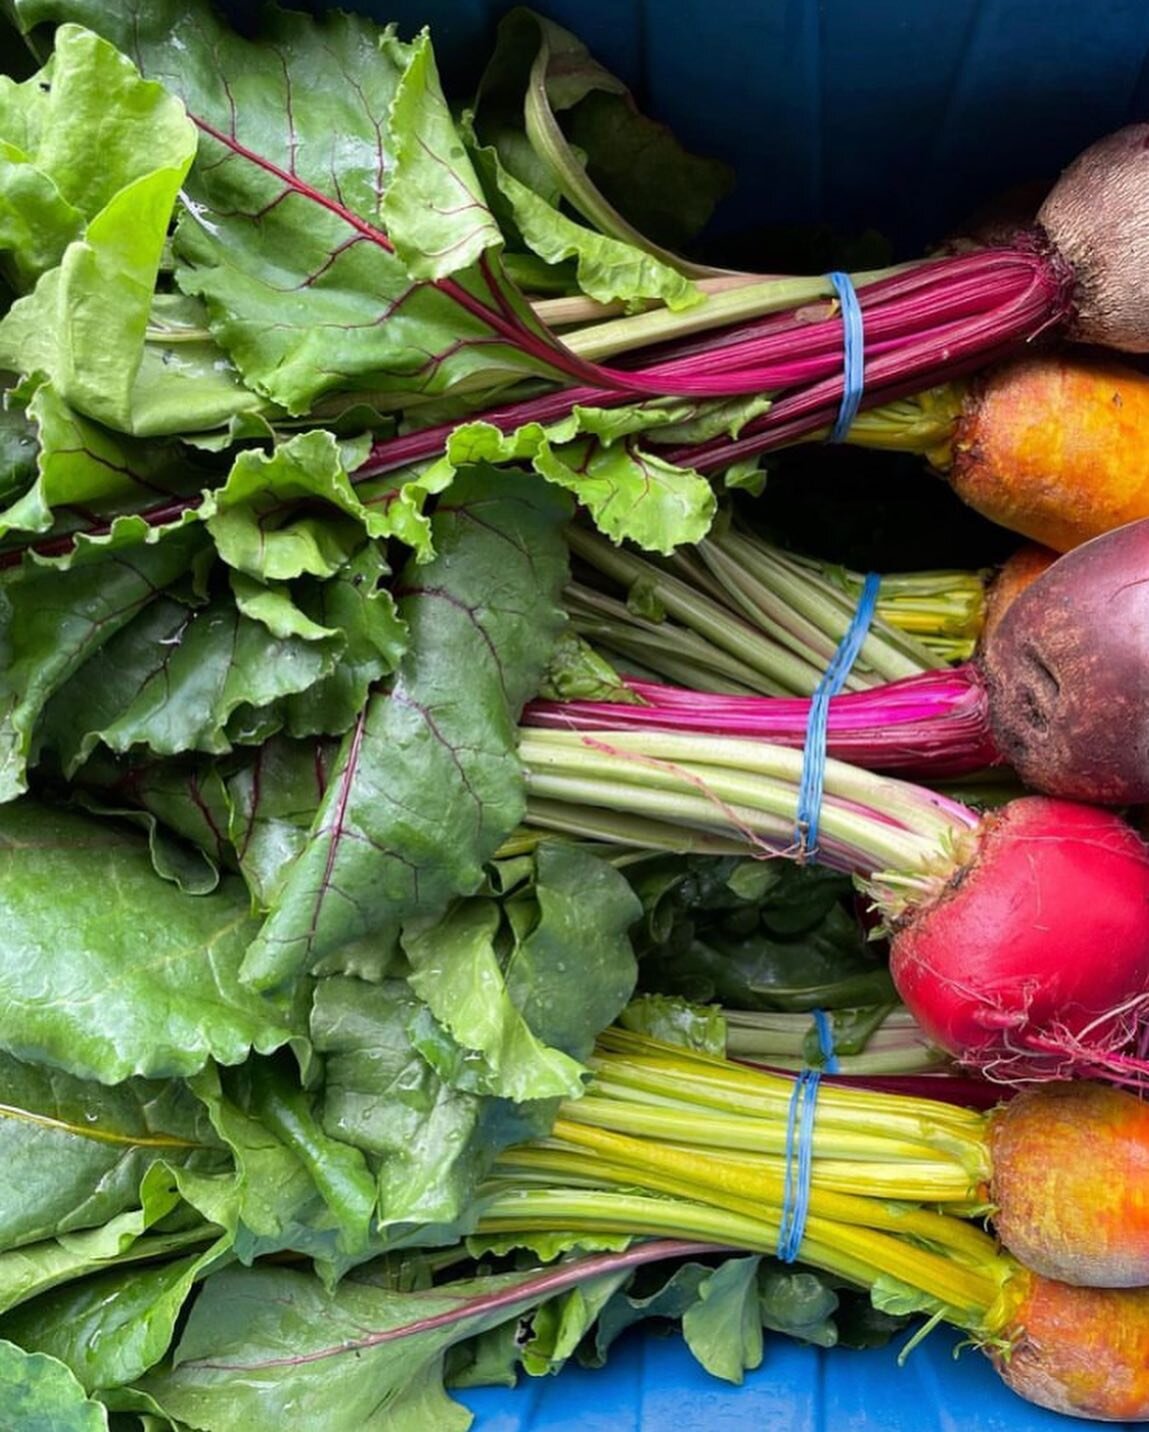 Shop with Freedom for your local farm fresh foods! 
March 18, 2023, we can&rsquo;t get enough of this Local Love! OPEN every Saturday 8:30am-Noon
Eat Fresh and Local every week with Freedom Farmers Market at the Carter Center
 
See who&rsquo;s at mar